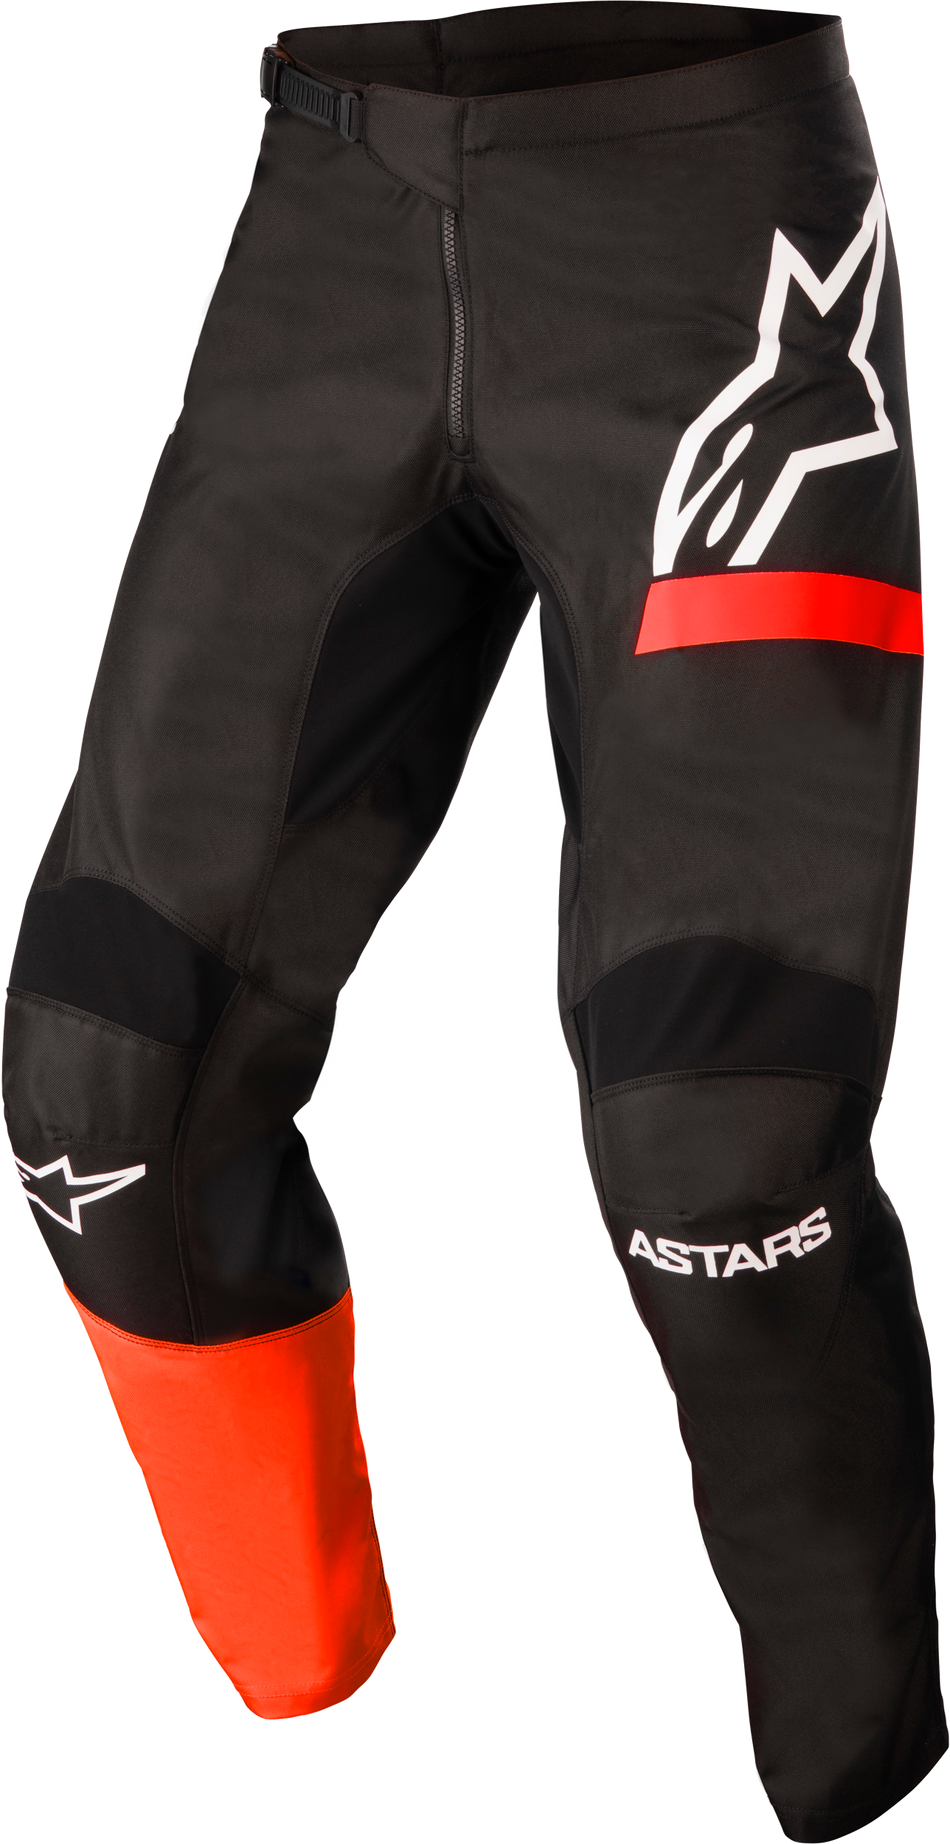 ALPINESTARS Youth Racer Chaser Pants Black/Bright Red Sz 26 3742422-1303-26